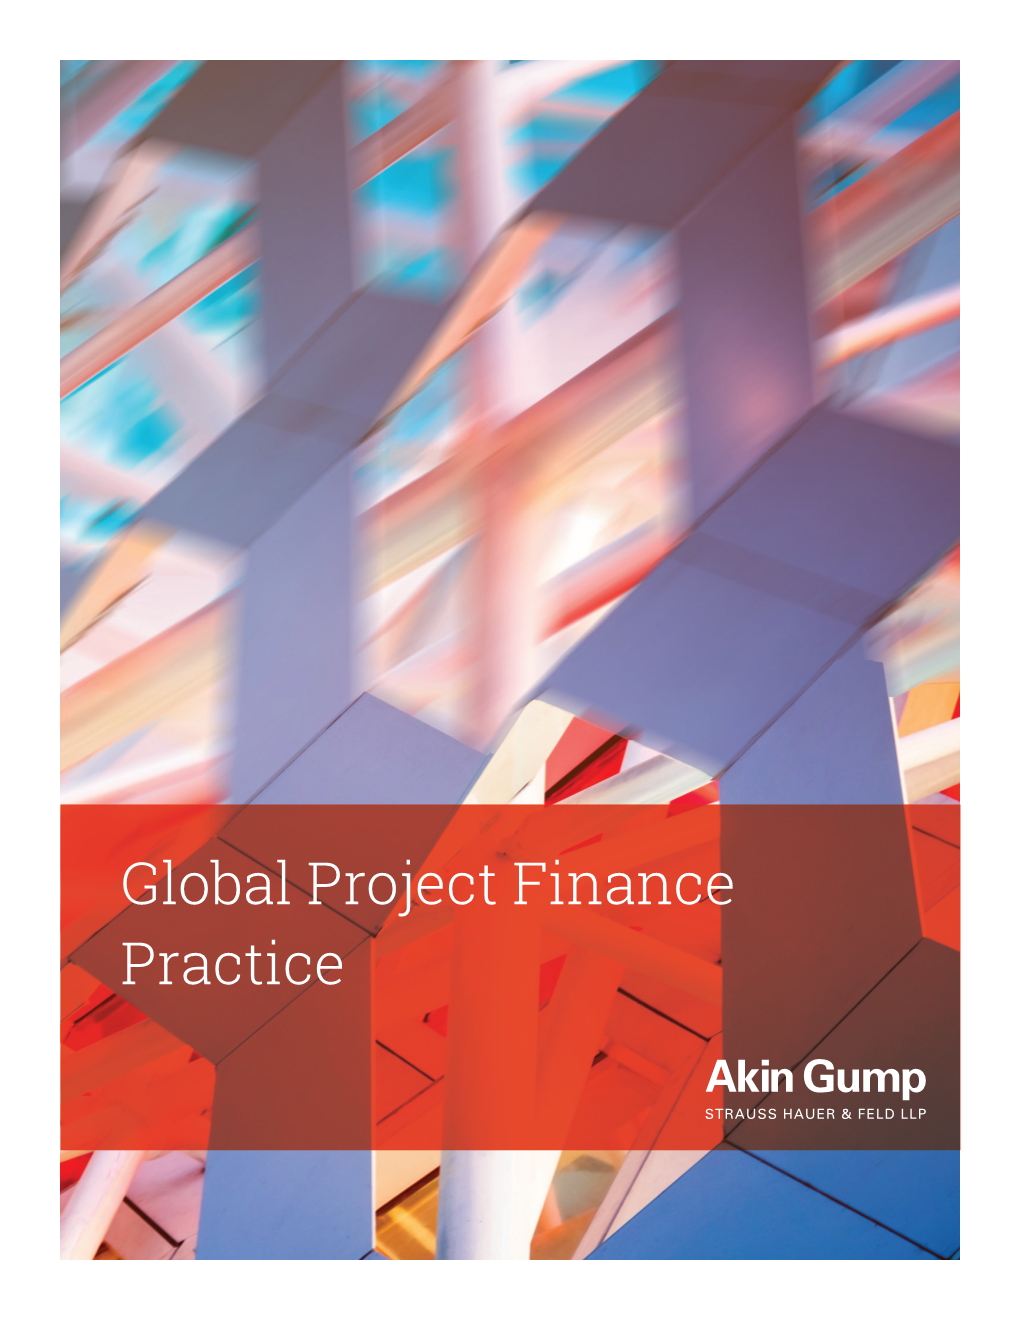 Global Project Finance Practice About the Firm